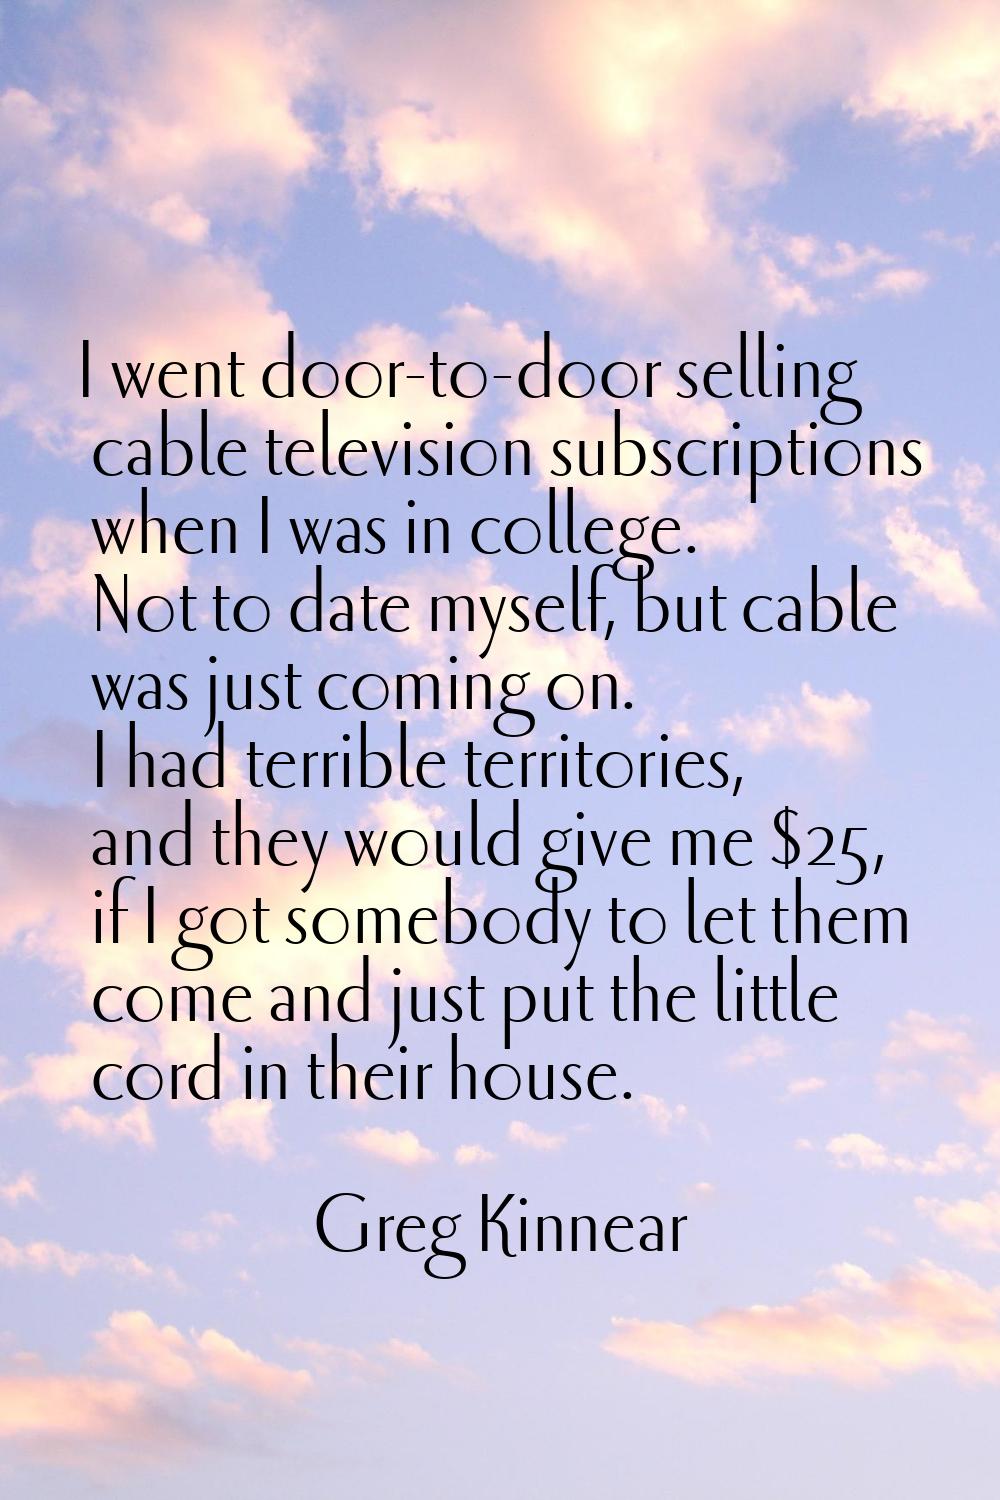 I went door-to-door selling cable television subscriptions when I was in college. Not to date mysel